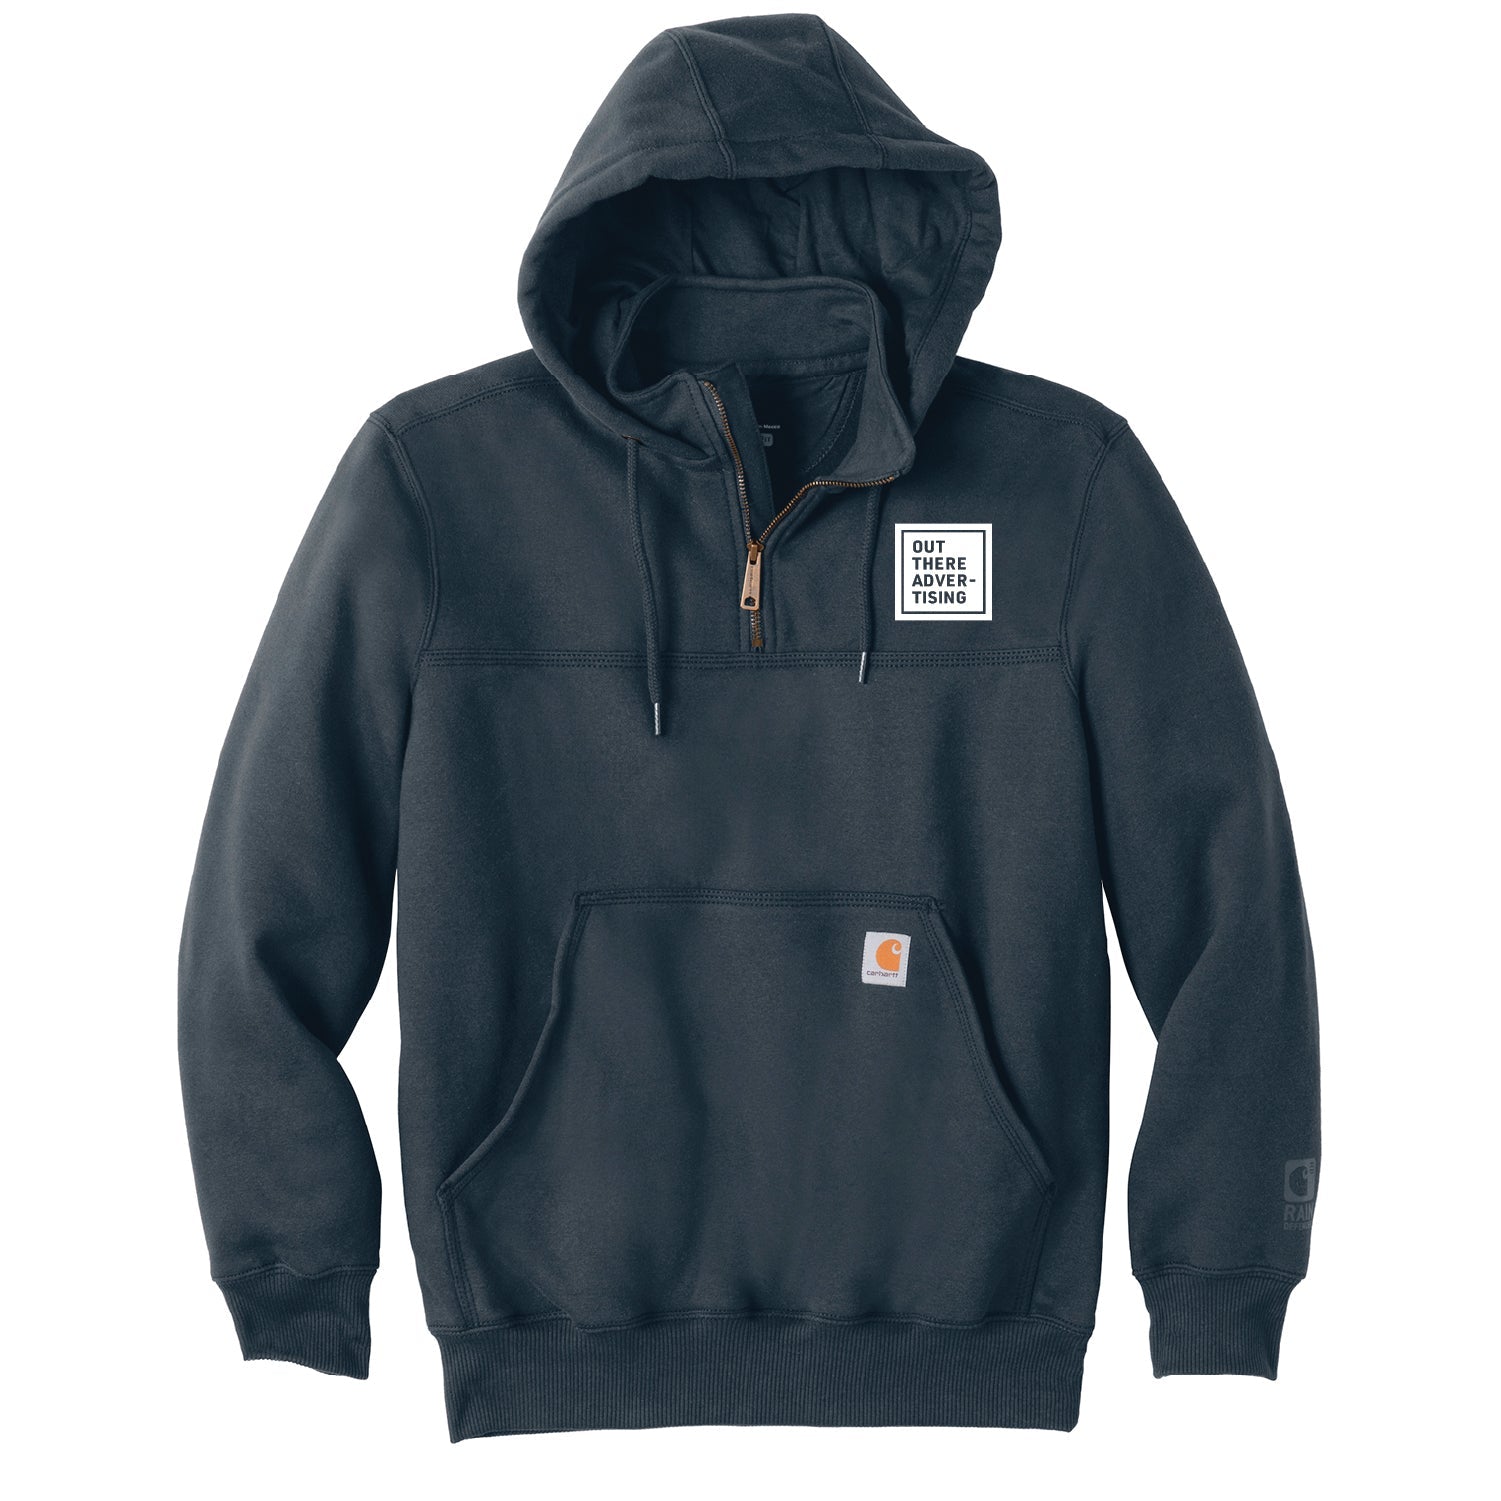 Out There Advertising Carhartt Heavyweight Hooded Zip Mock Sweatshirt - DSP On Demand